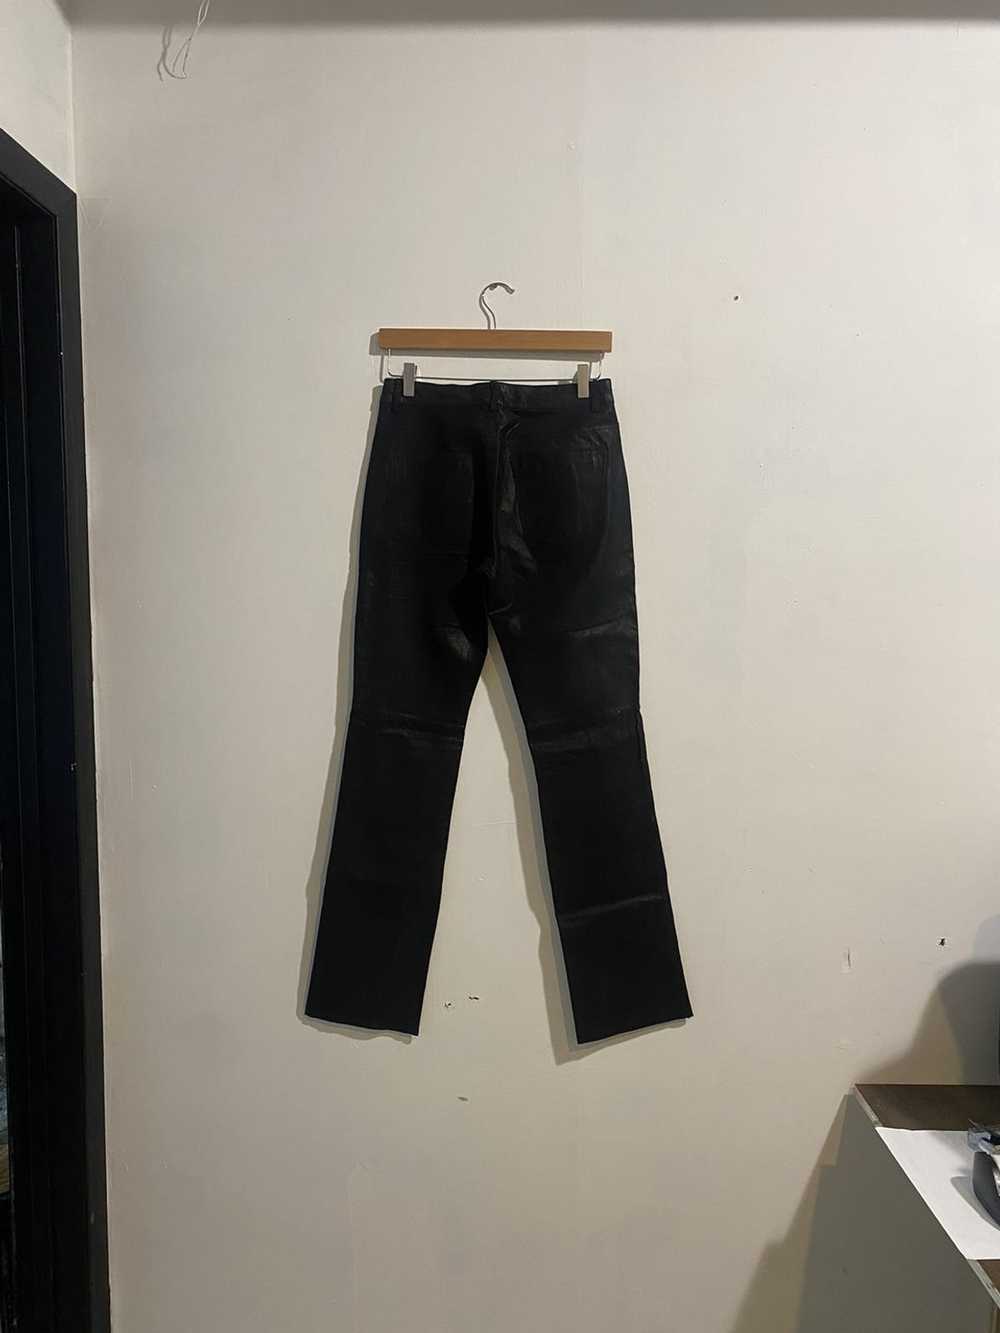 Guess Guess leather black pants - image 2